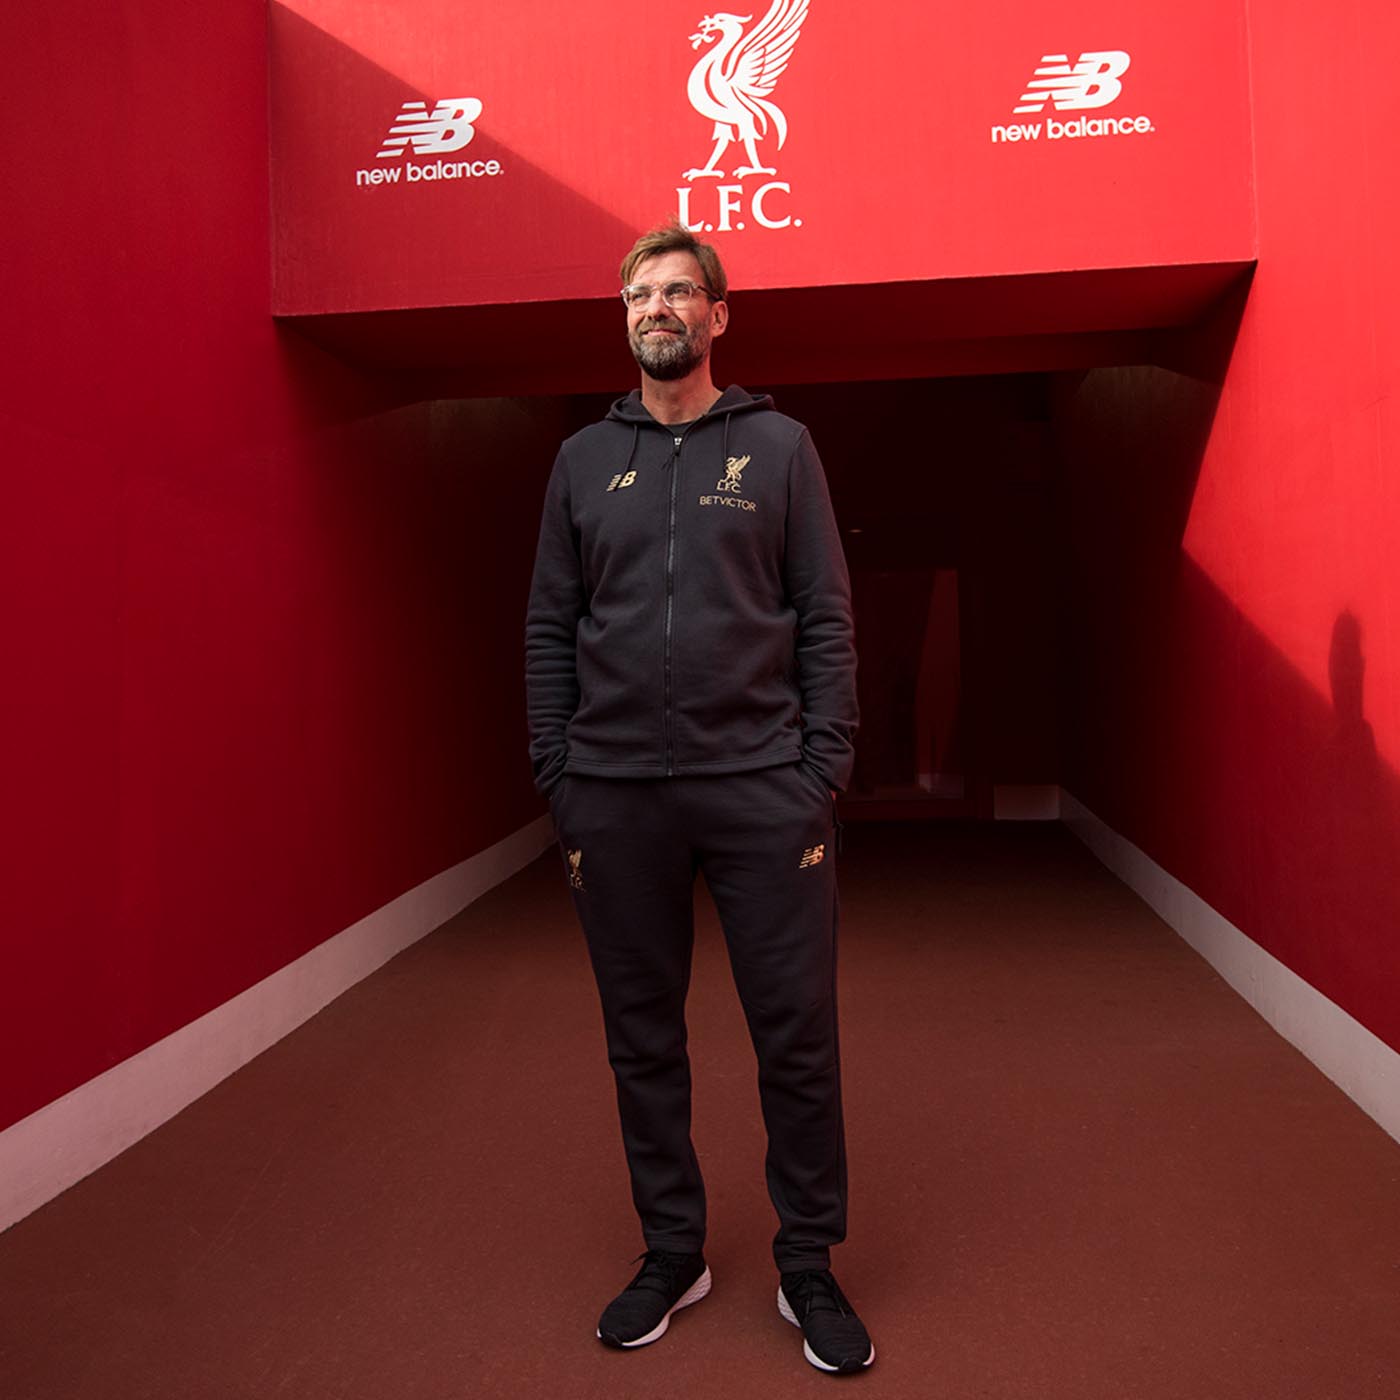 New Balance Liverpool Managers Collection Klopp body_0001_06.08.18 09.00 BST FW18 Managers Collection 4570-1.jpg